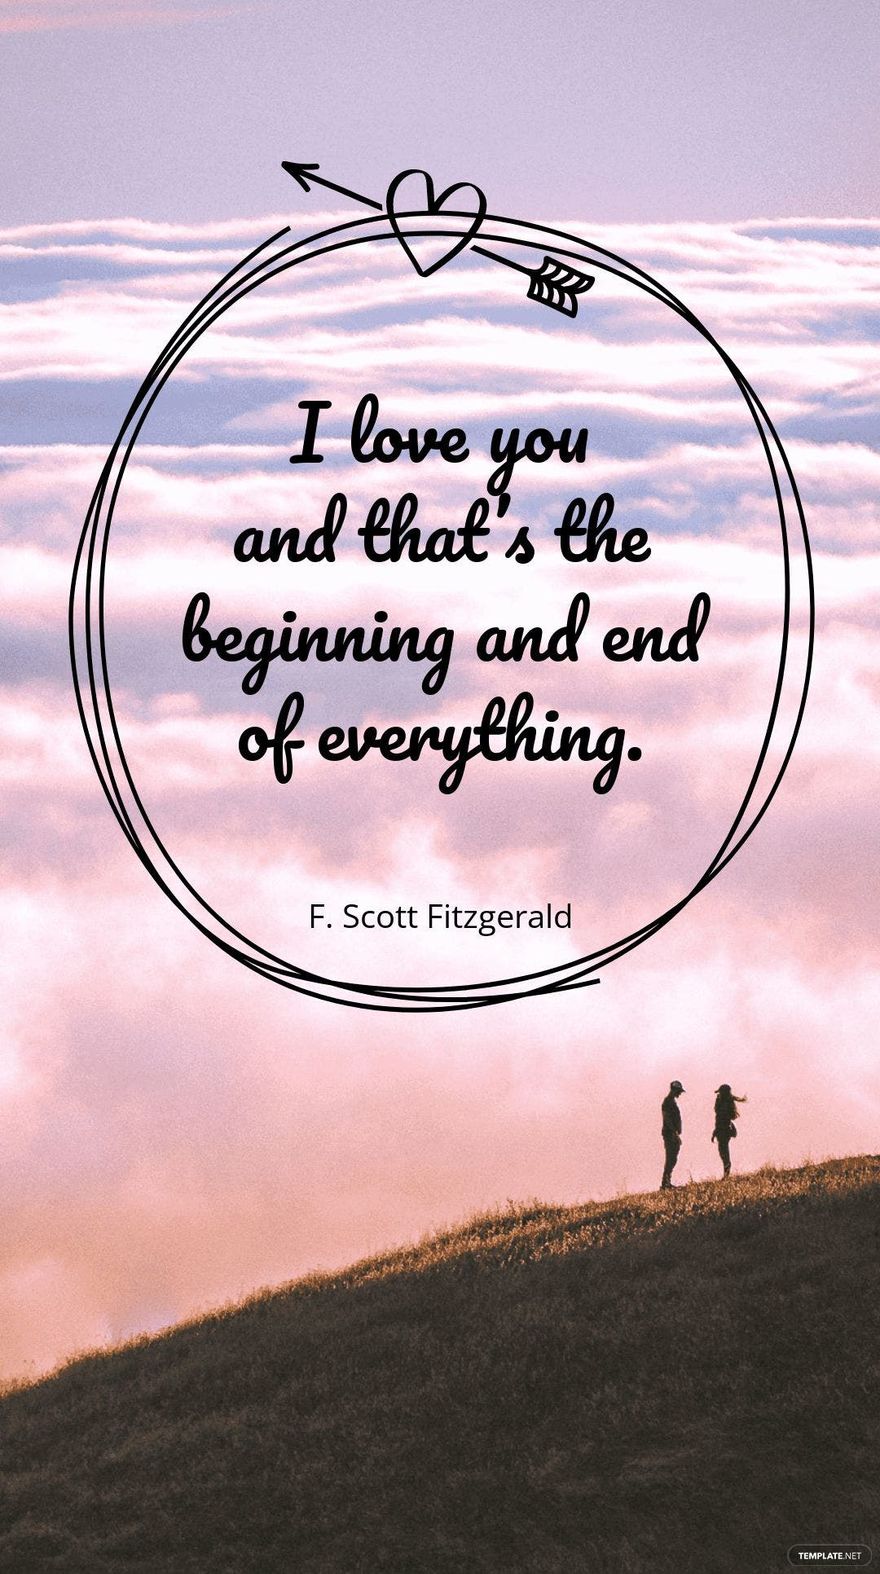 F. Scott Fitzgerald - “I love you and that’s the beginning and end of everything.”